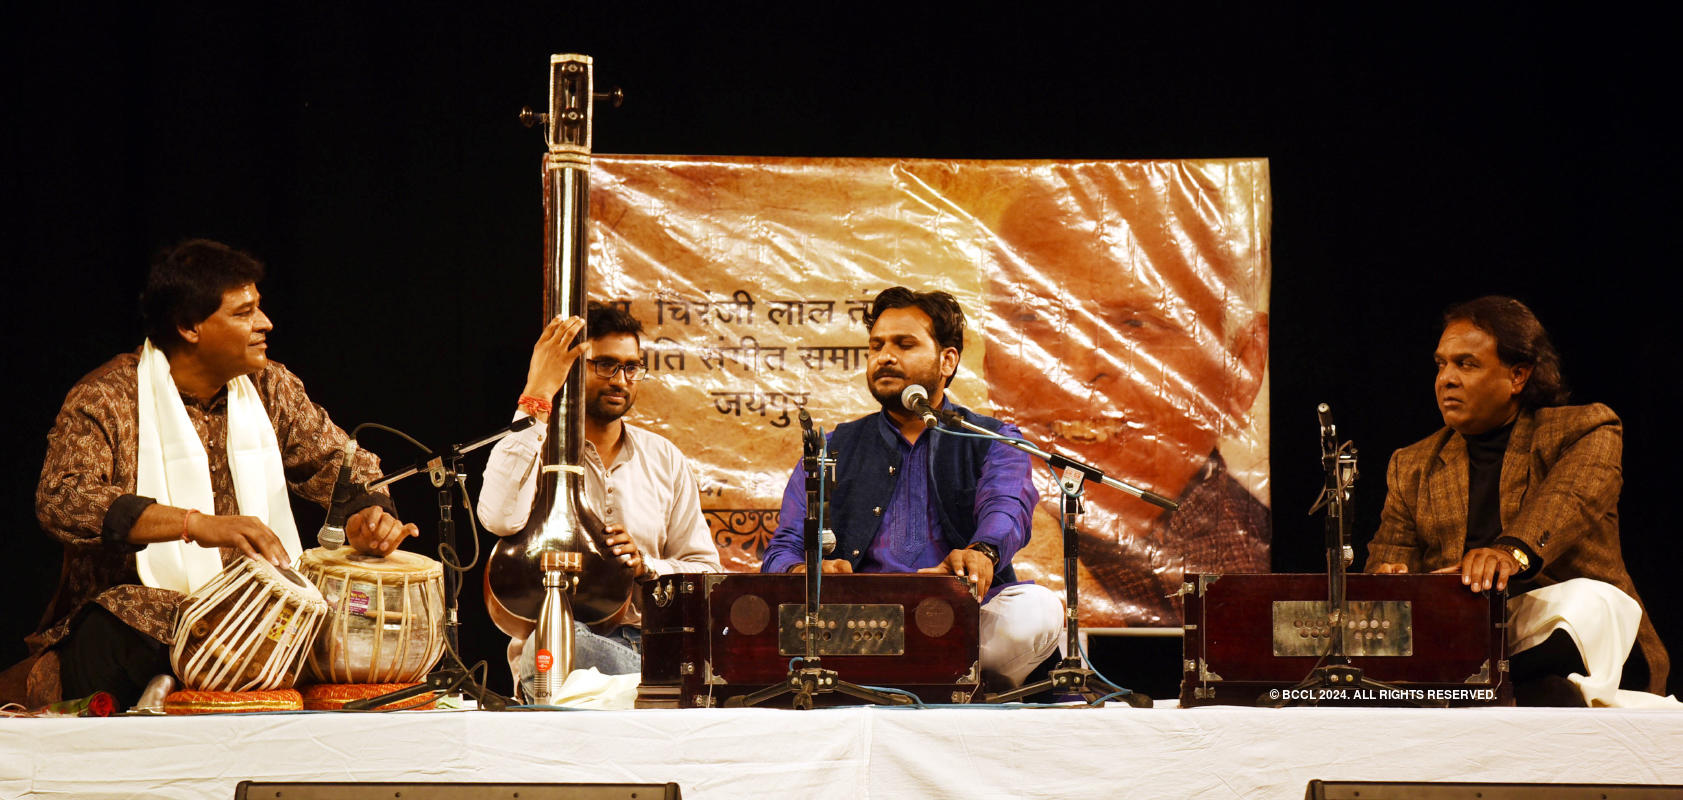 Musicians pay tribute to Pt Chiranji Lal Tanwar